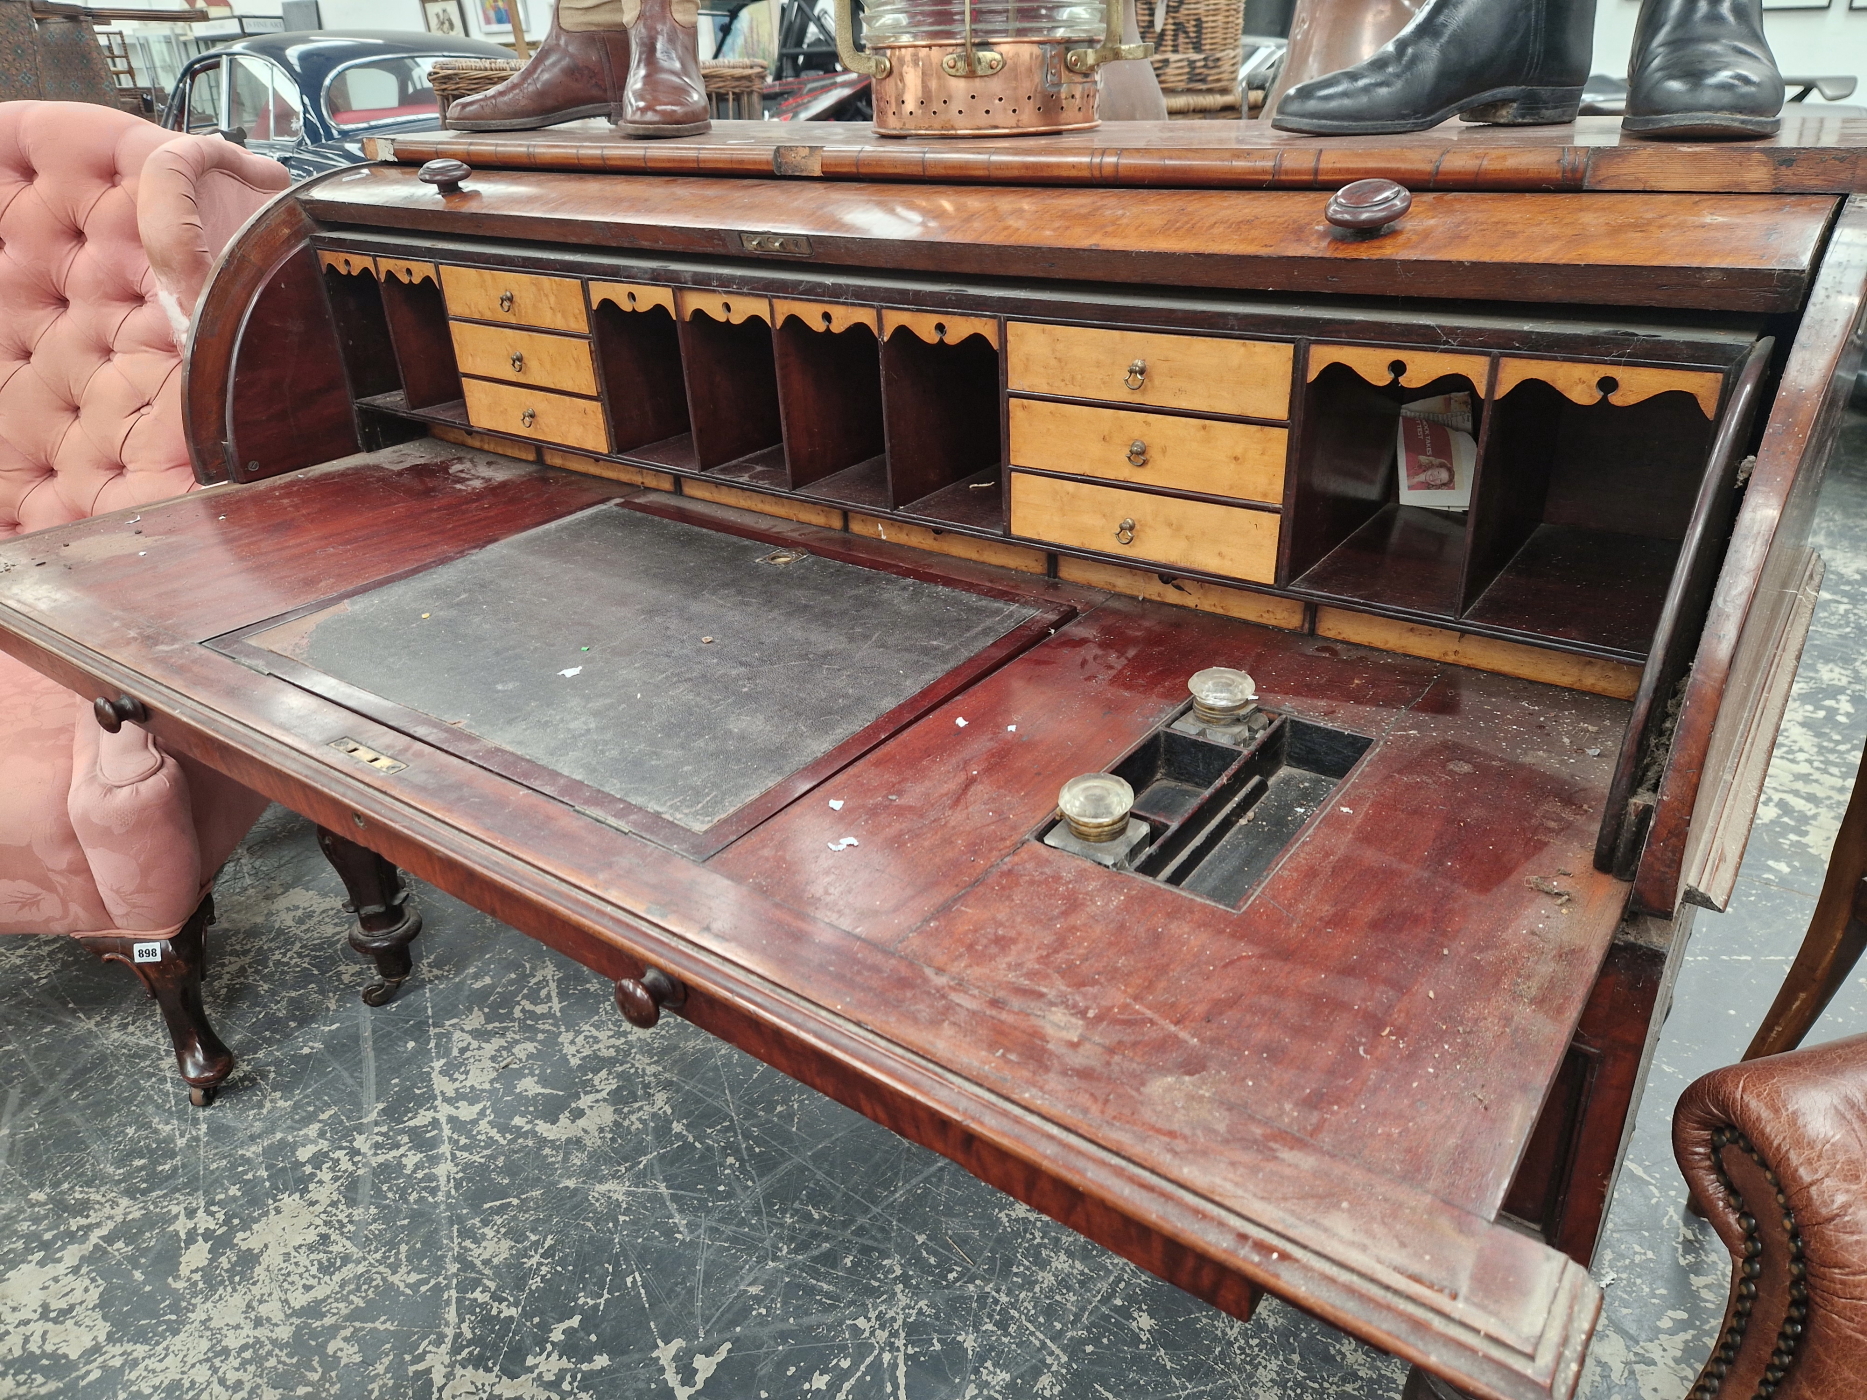 A 19th C. MAHOGANY ROLL TOP DESK WITH A CONFIGURATION OF FIVE DRAWERS ABOVE THE CYLINDRICAL LEGS - Image 3 of 9